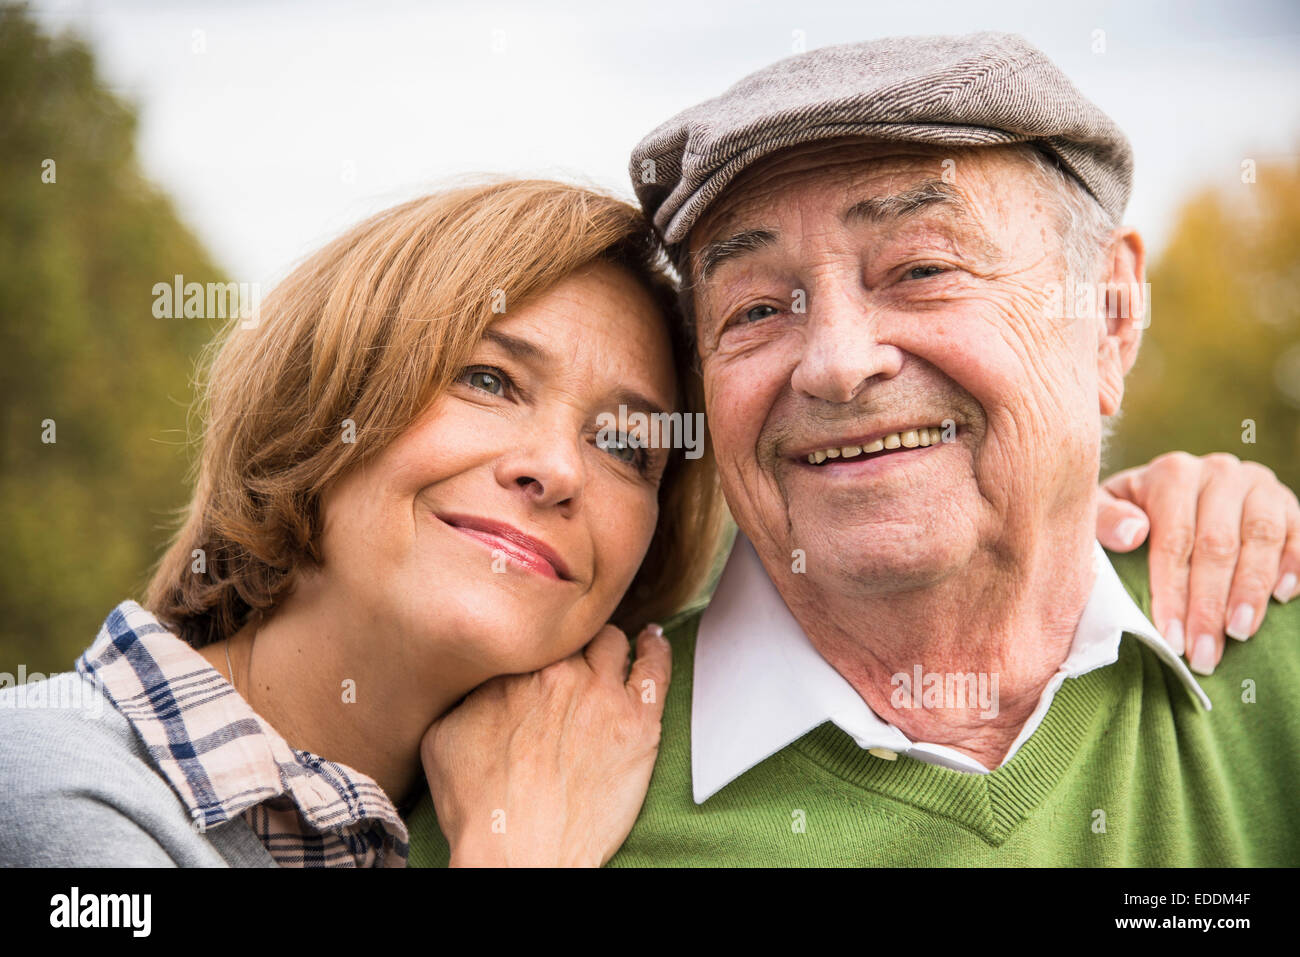 Confident senior man with daughter outdoors Stock Photo